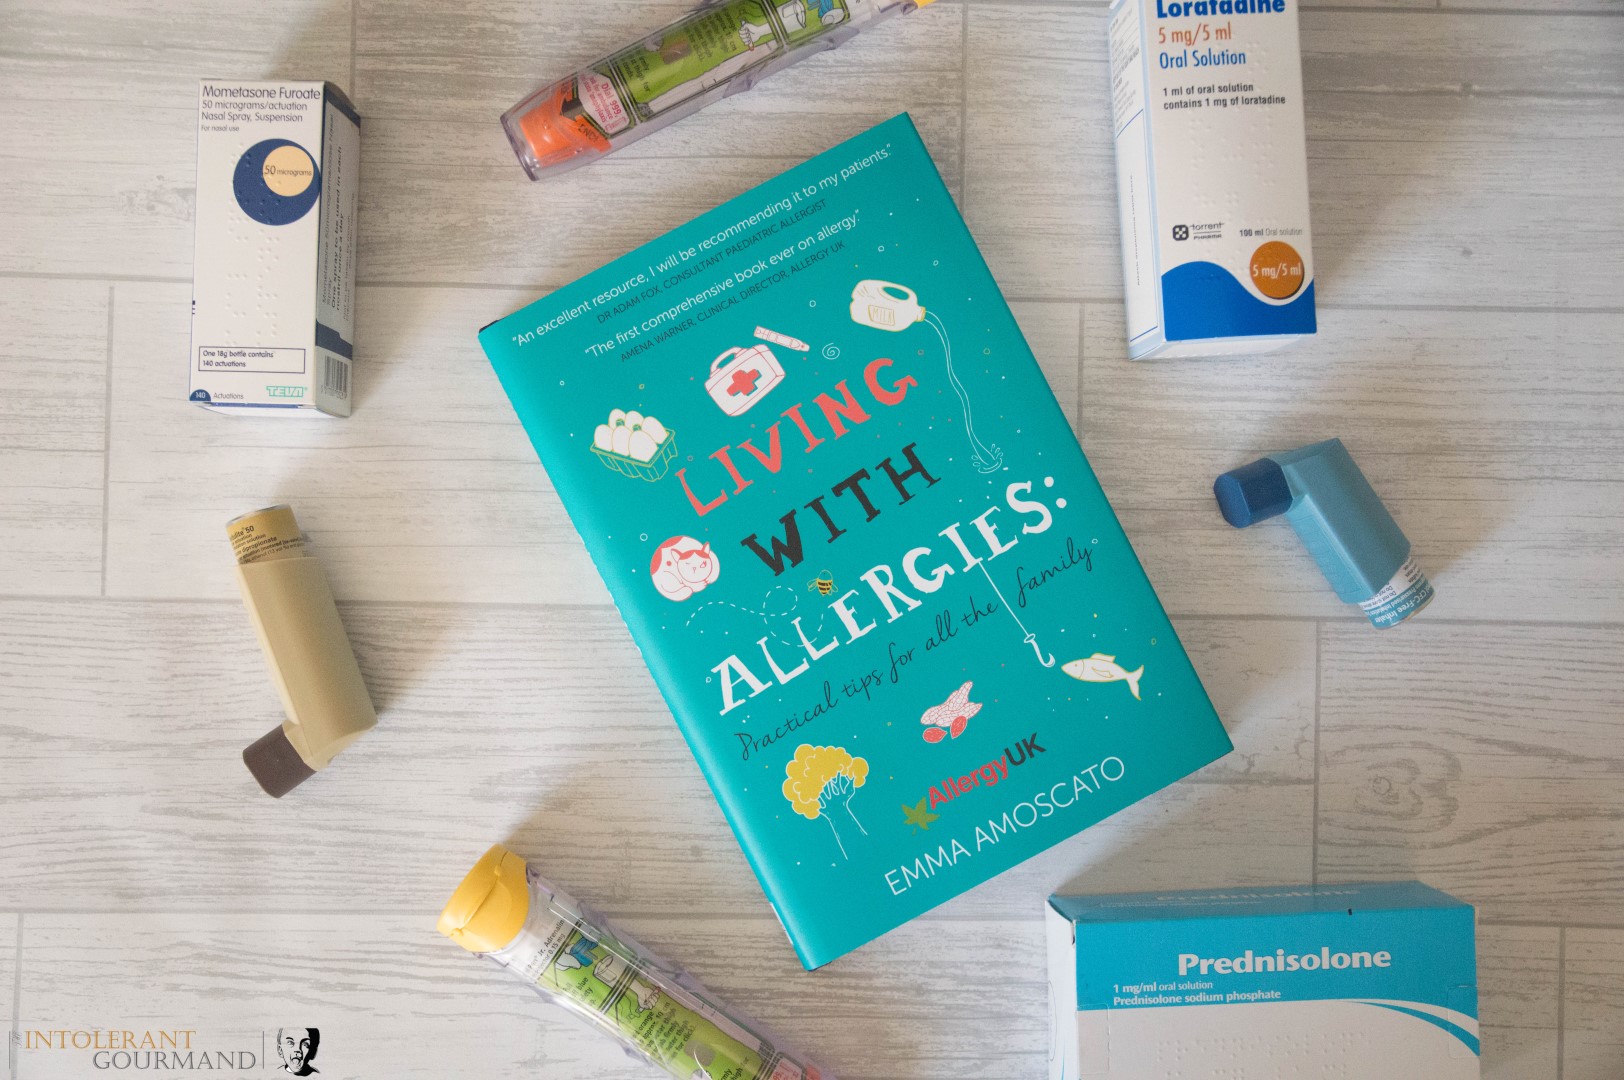 Living with allergies a guide to living and thriving with allergies - everything you need to know in the early days of diagnosis of allergies. Book surrounded by inhaler, epi pens, antihistamines and steroids. www.intolerantgourmand.com